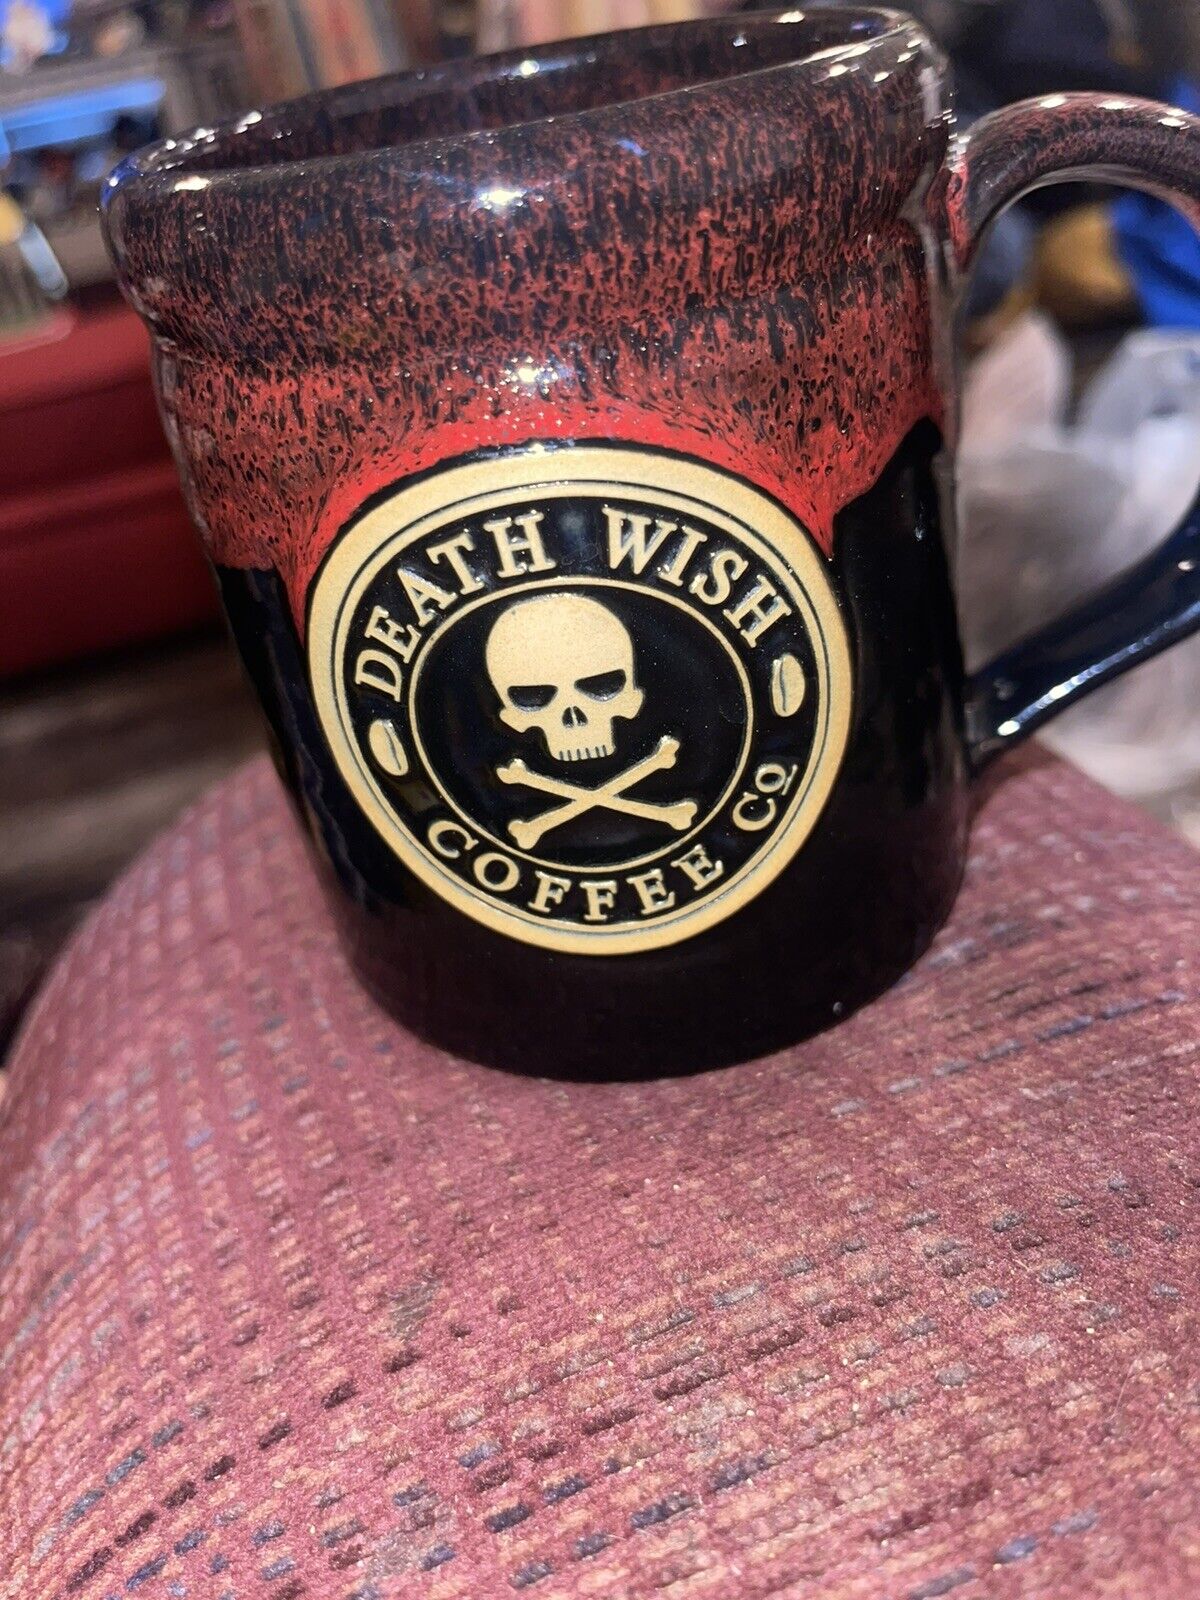 RARE 2016  Death Wish Coffee Annual Logo Hand Thrown Pottery Mug Don’t Miss Out